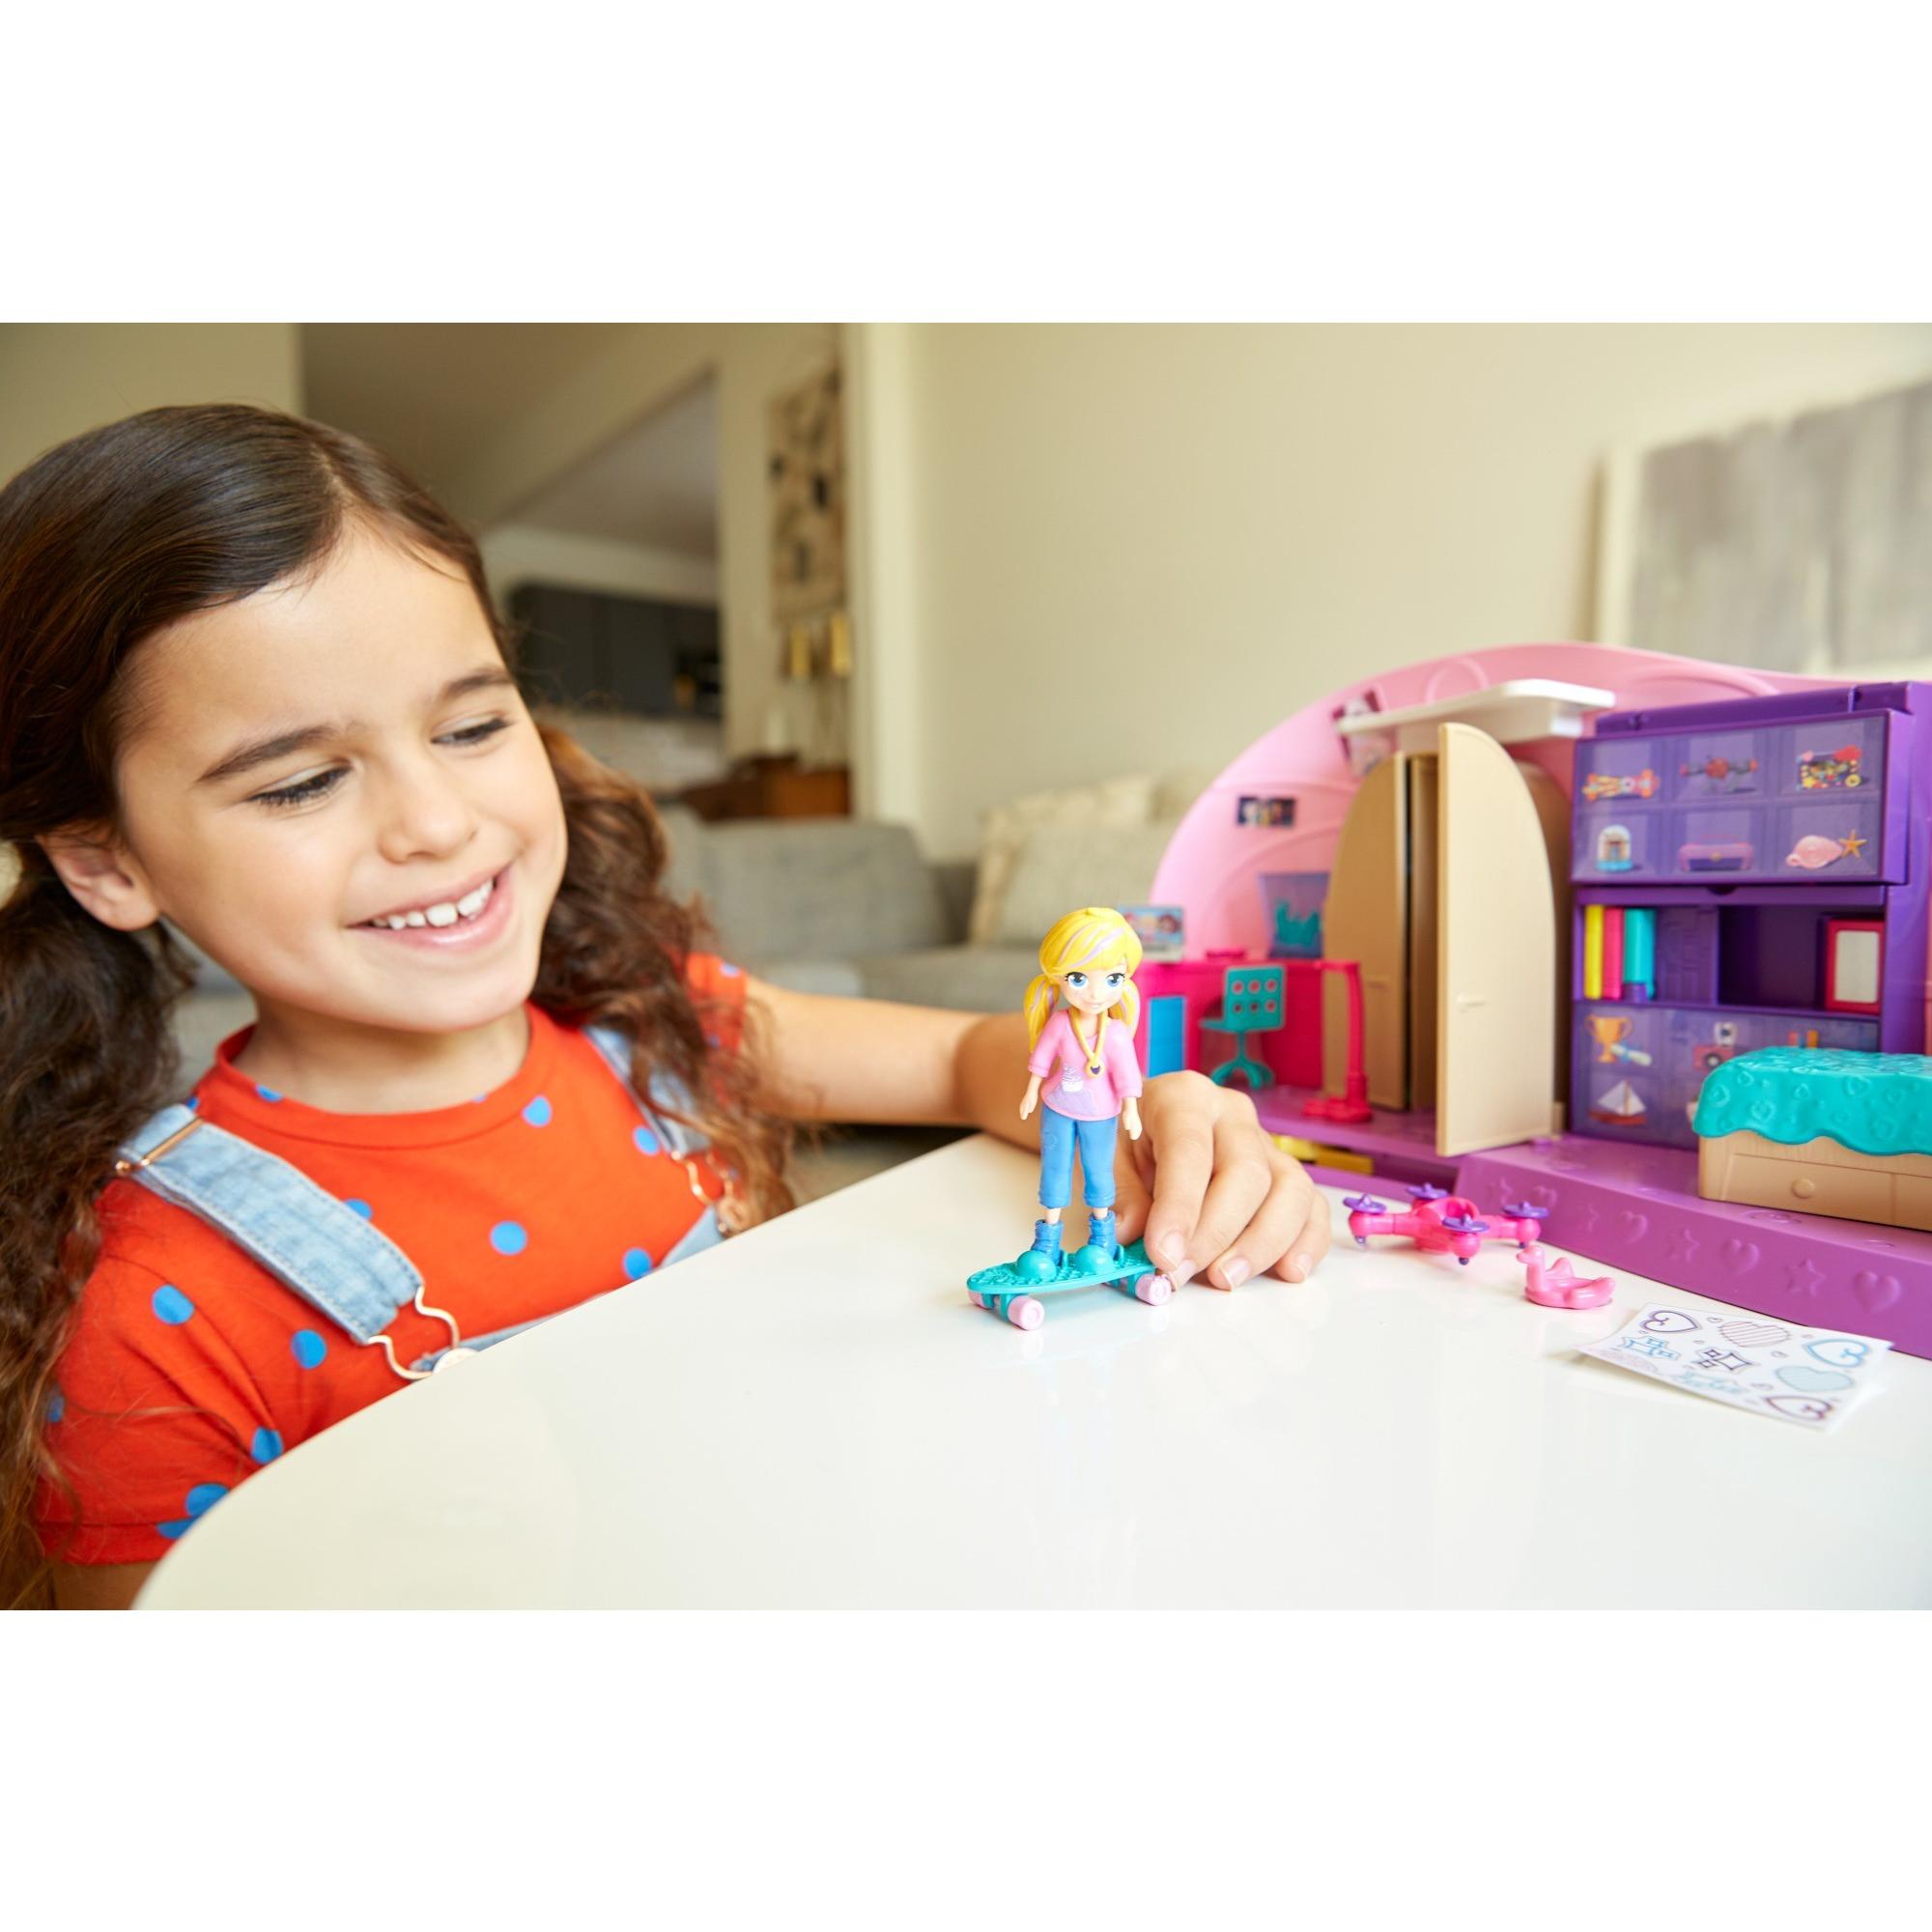 Polly Pocket Go Tiny! Room Playset with Adventure Dolls & Accessories - image 3 of 15